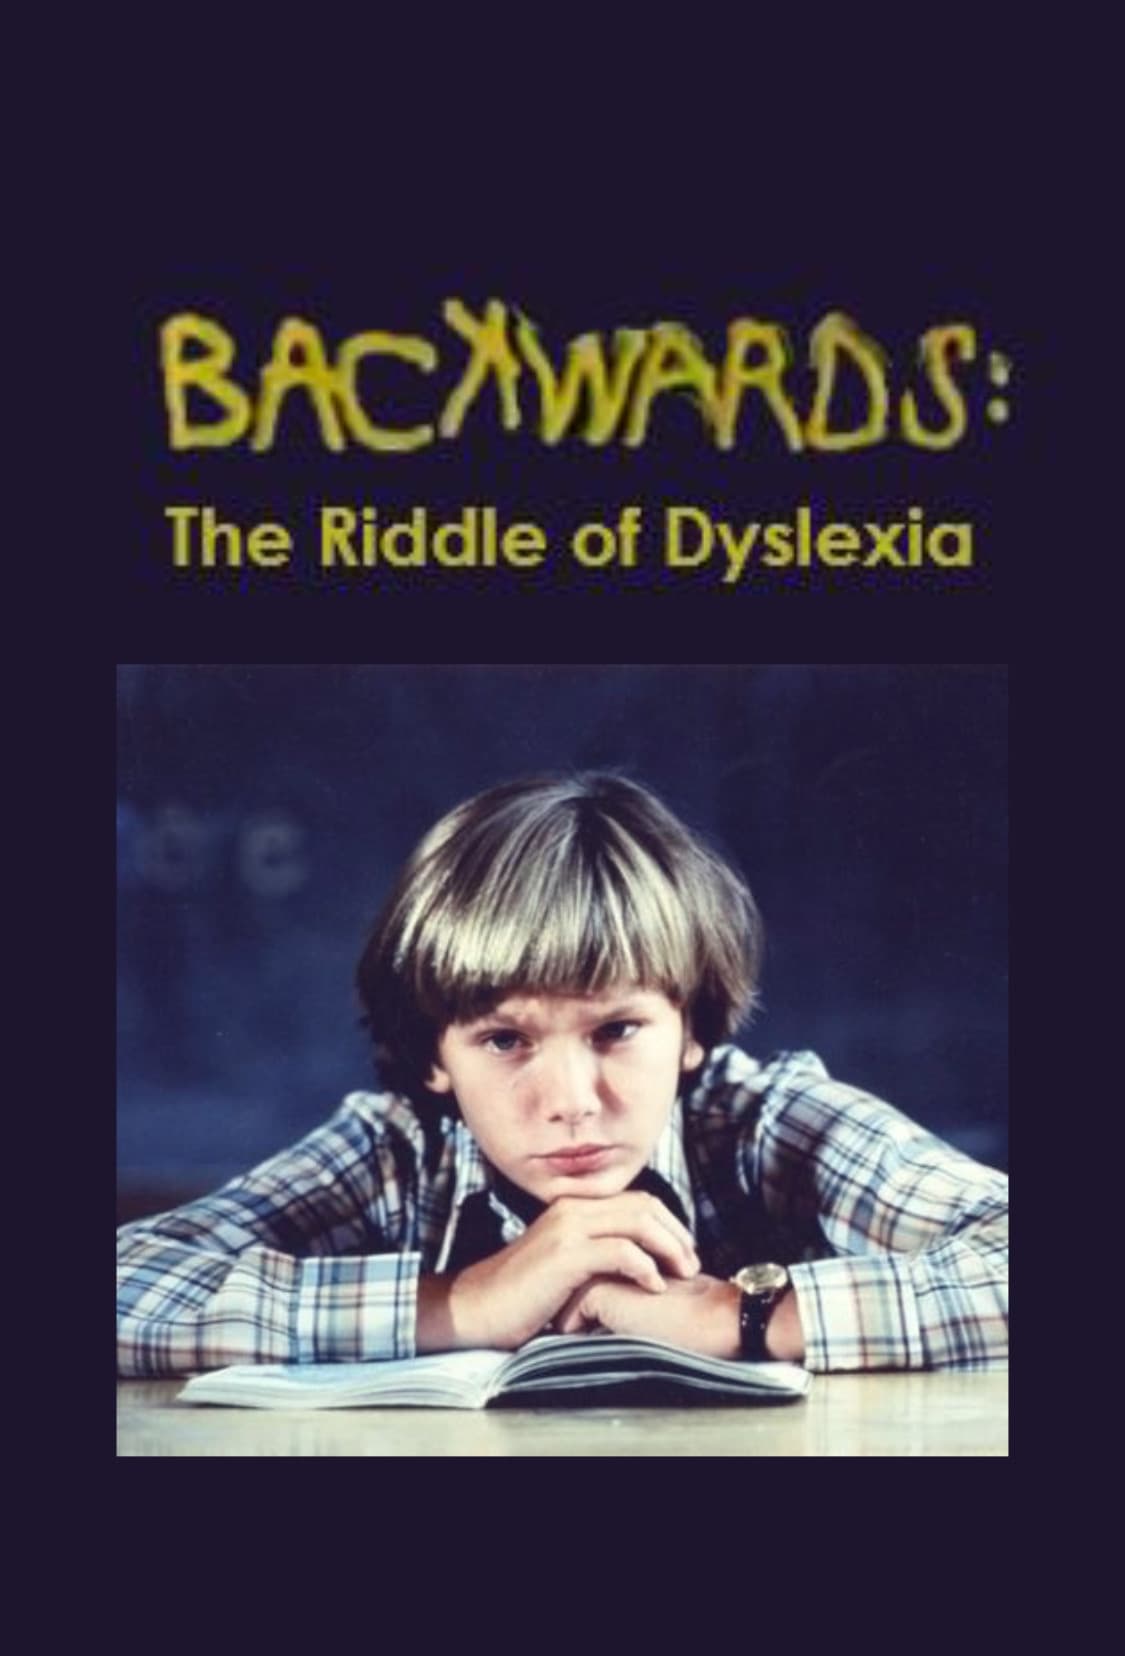 Backwards: The Riddle of Dyslexia (1984)